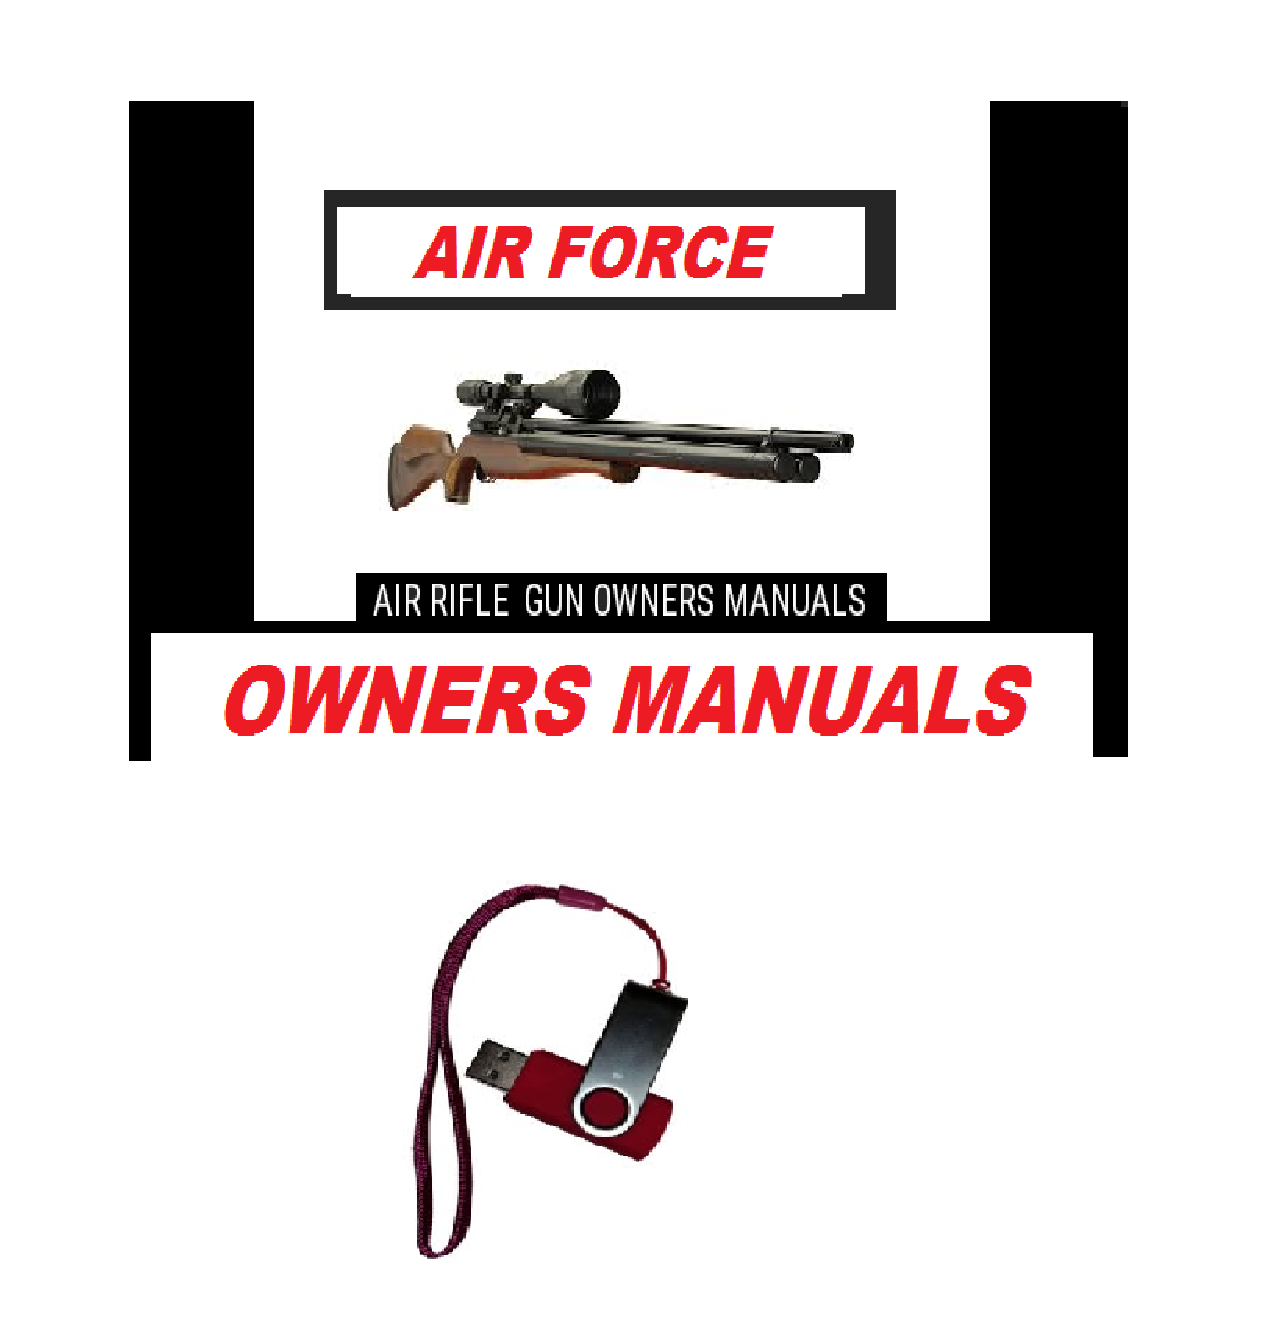 Air Force EDGE  Rifle Safety and Operational Airgun Air Rifle Gun Owners Manuals Firearms Weapons DOWNLOAD  #AirForce